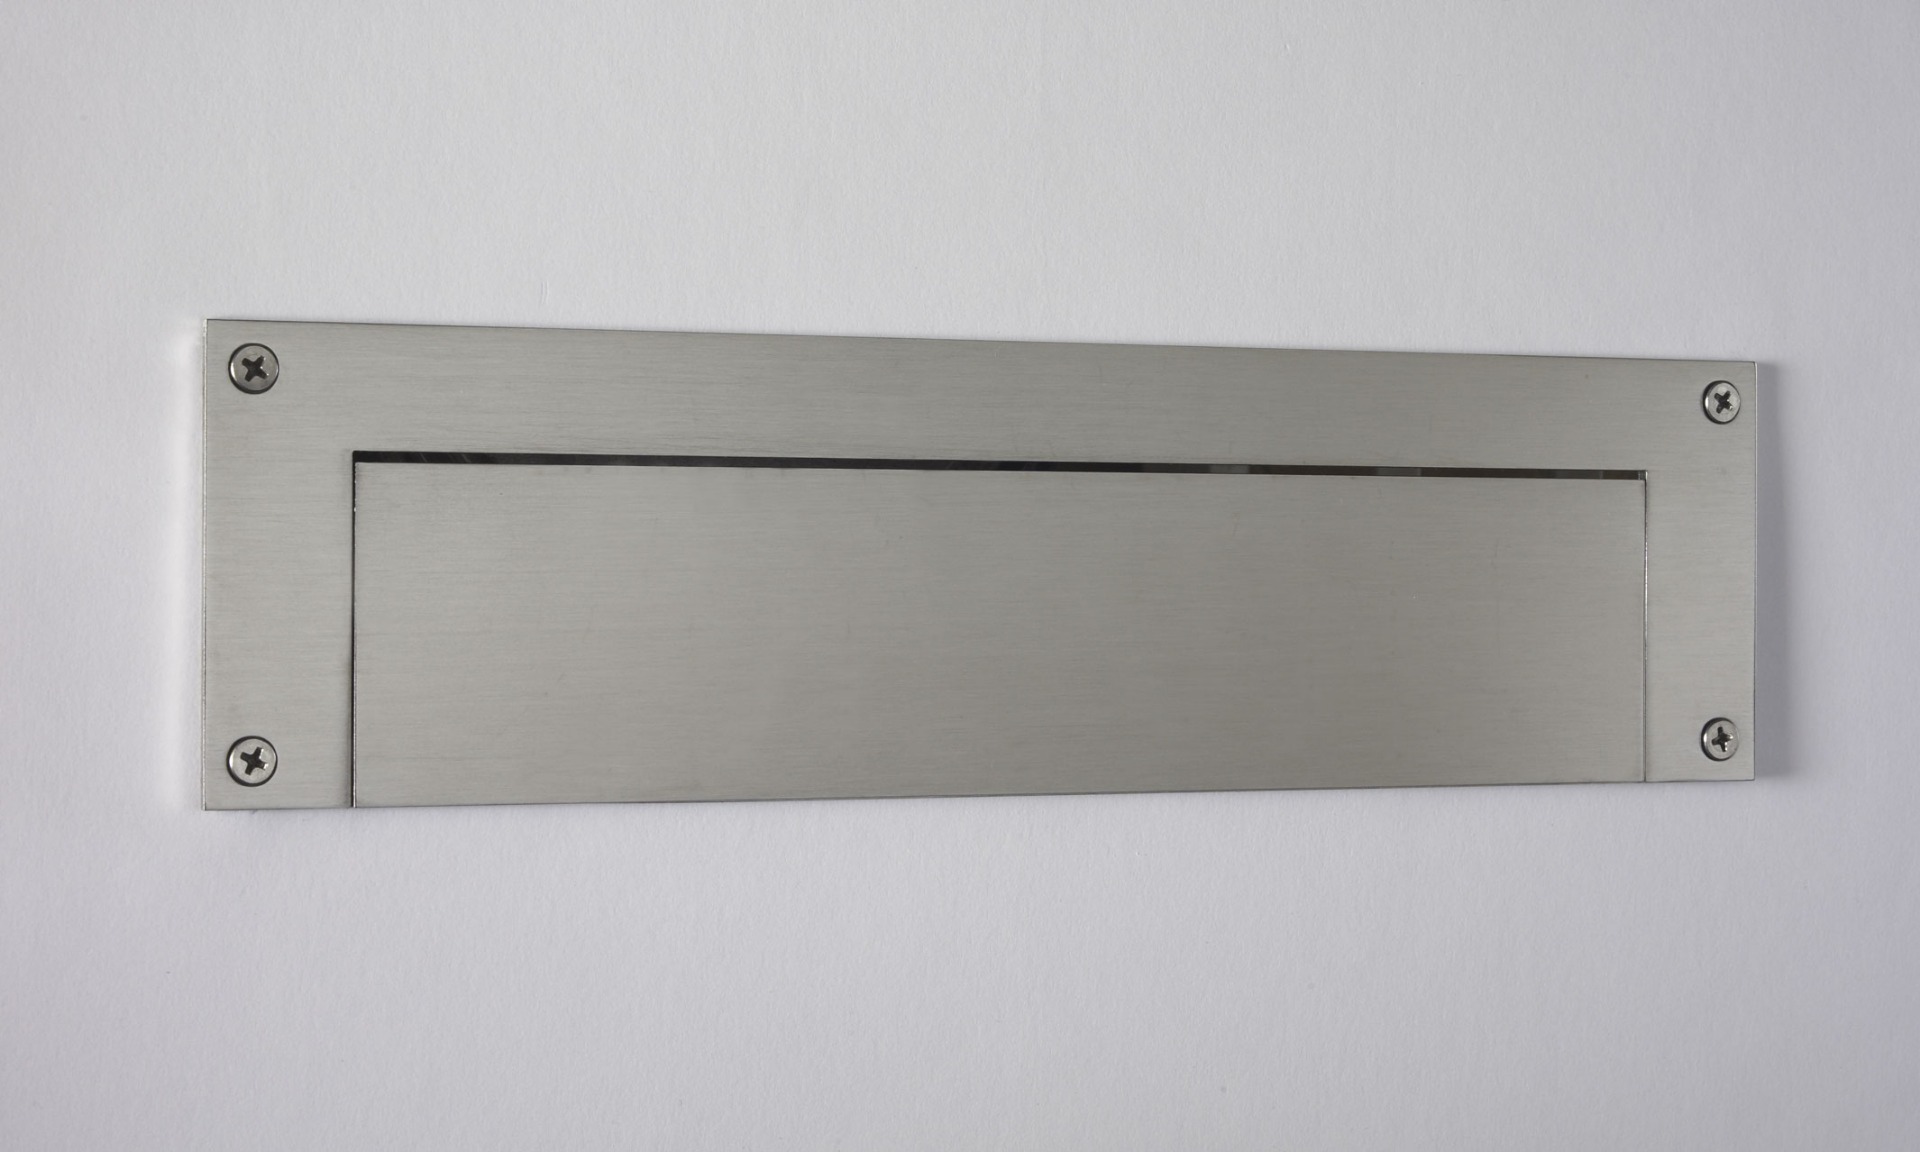 Stainless Steel Mail Slot - LARGE (15.7 in. x 3.9 in.) - Rear Piece Only (Choose Finish)